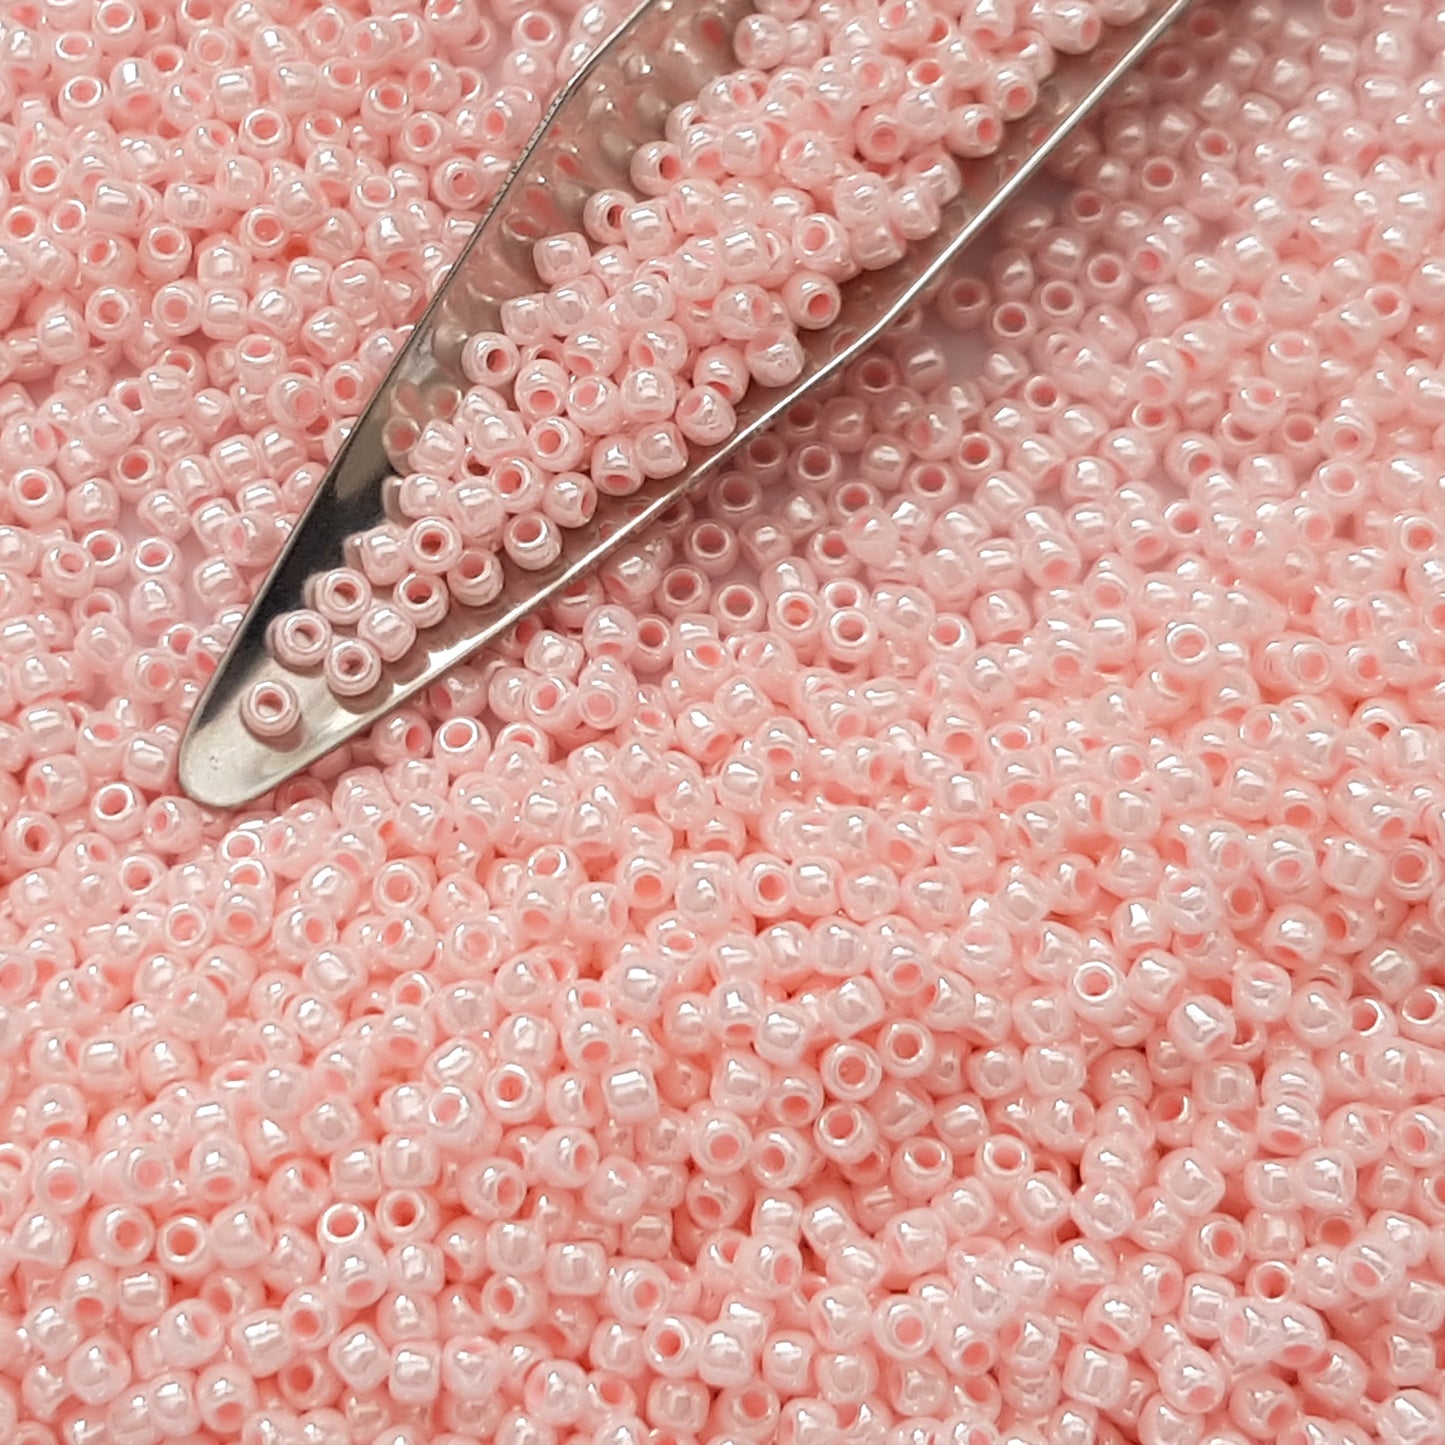 11/0 TR-126 Baby Pink Opaque Lustre 10g/30g Round Toho Seed Beads | Beading Supply